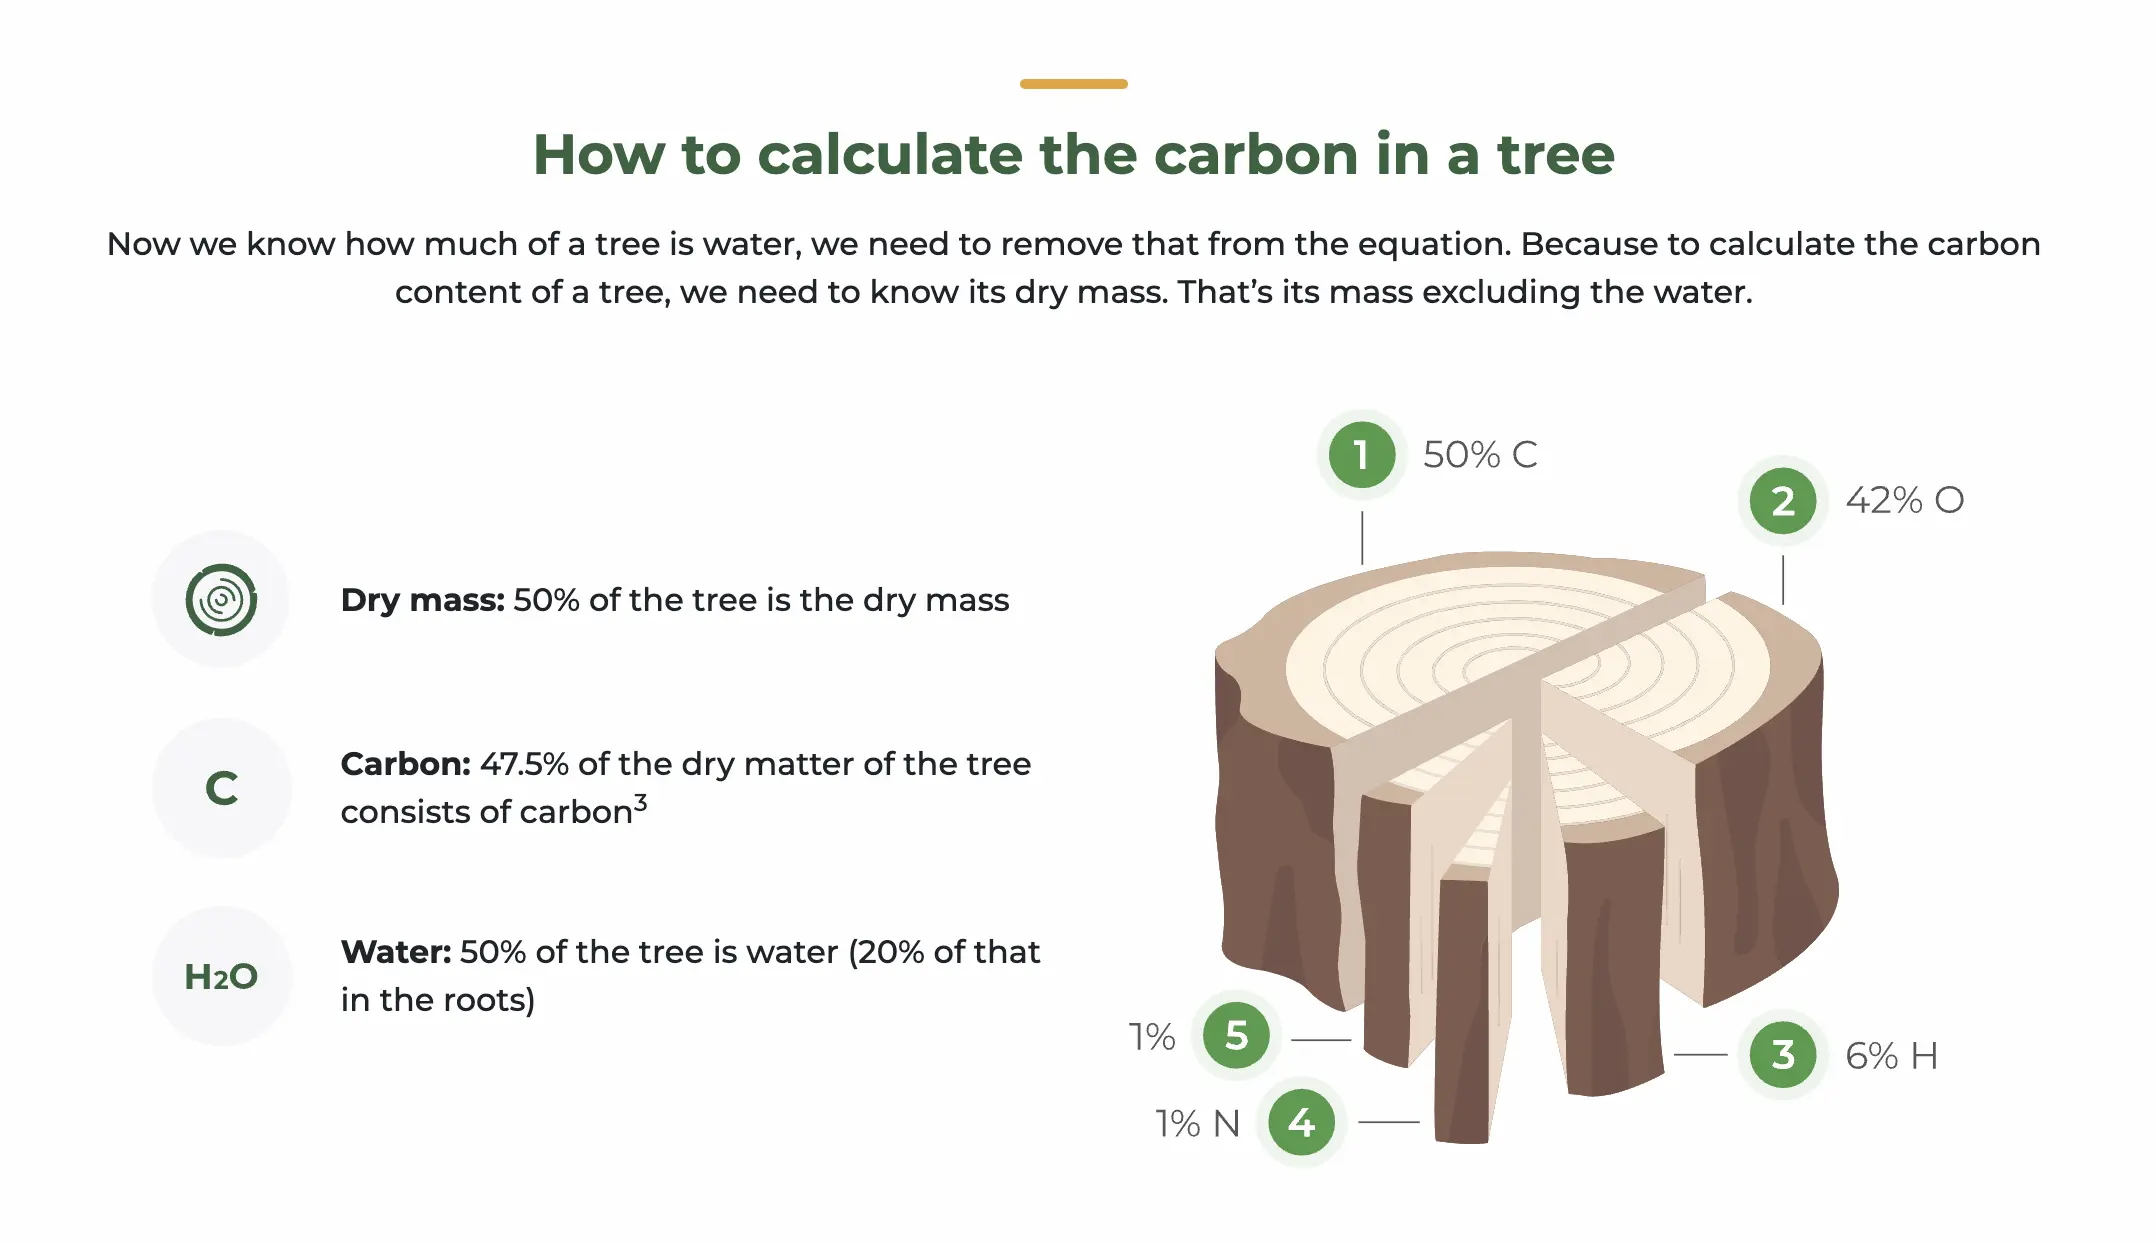 Diagram showing the carbon composition of a tree.